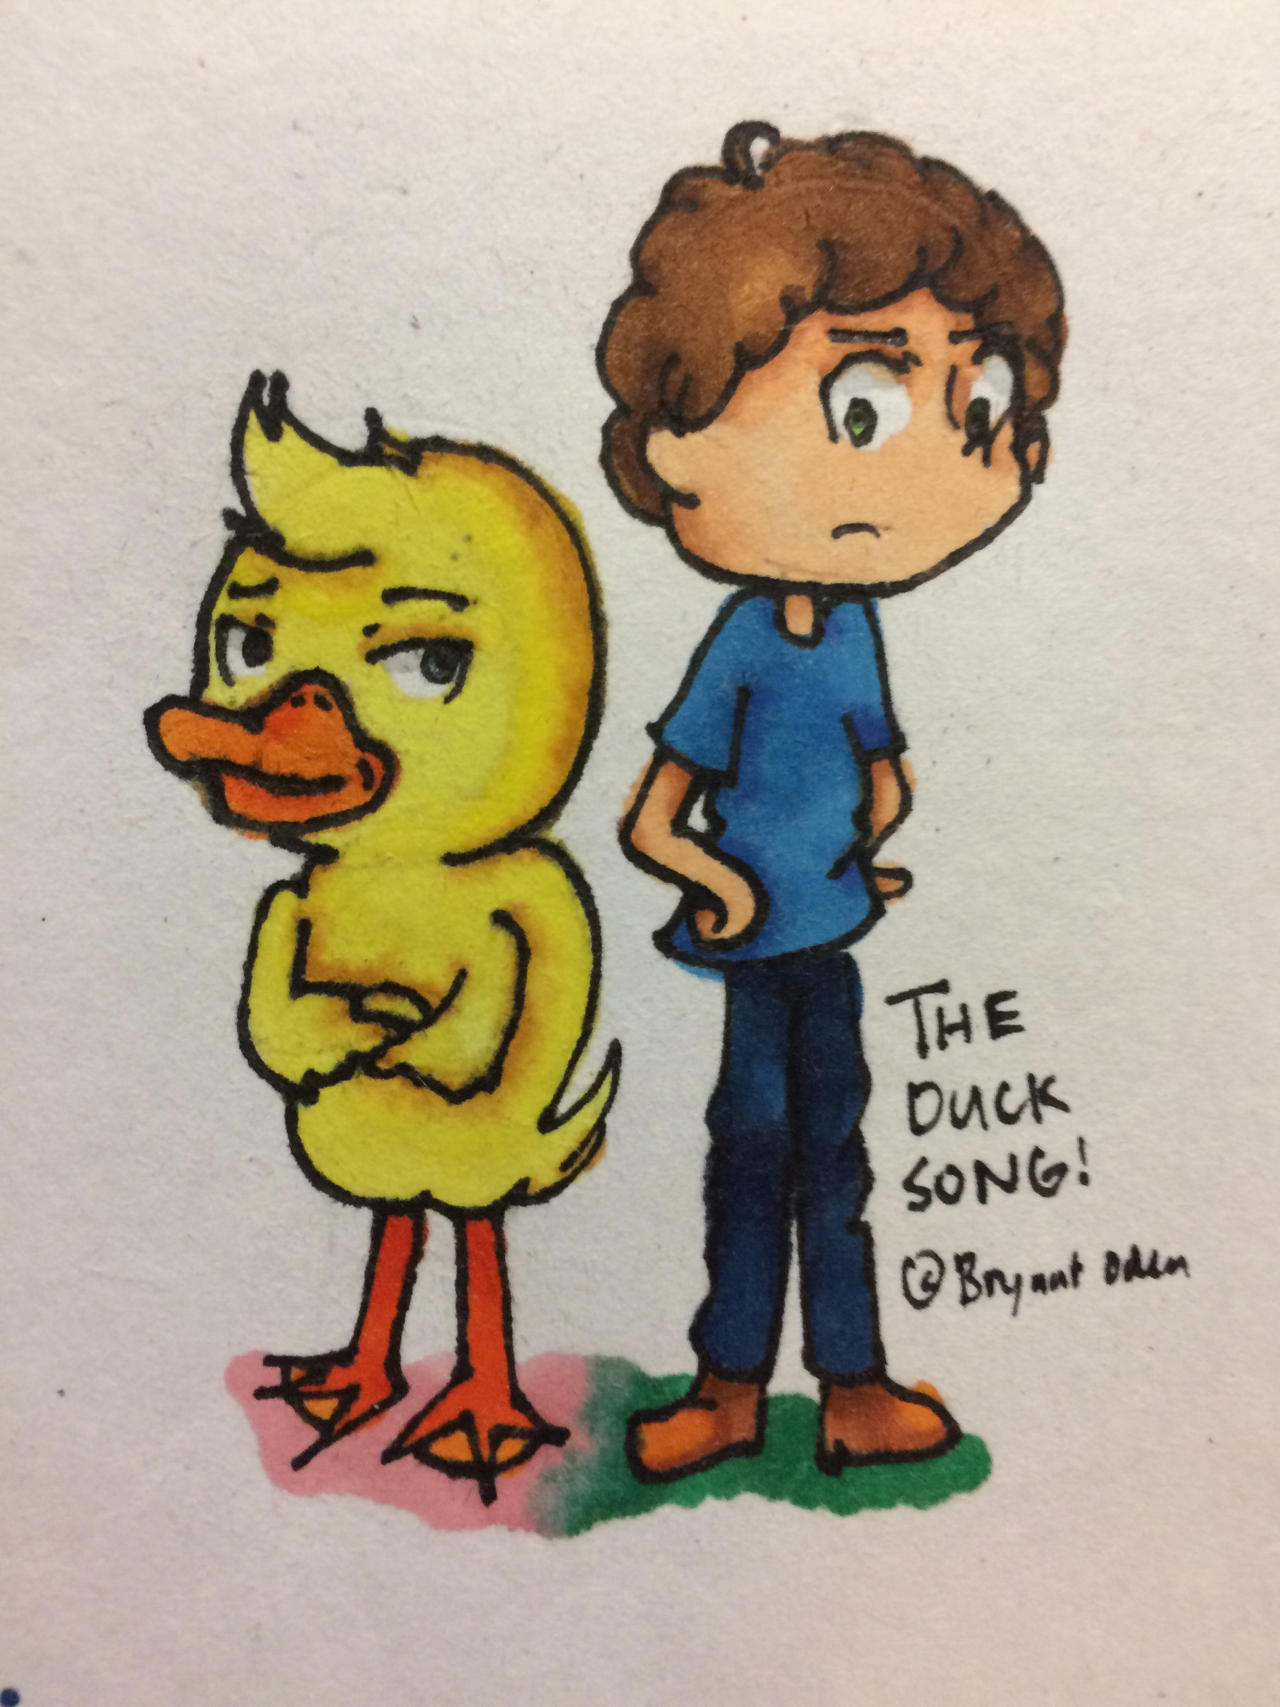 The Duck Song by postcretaceous on DeviantArt